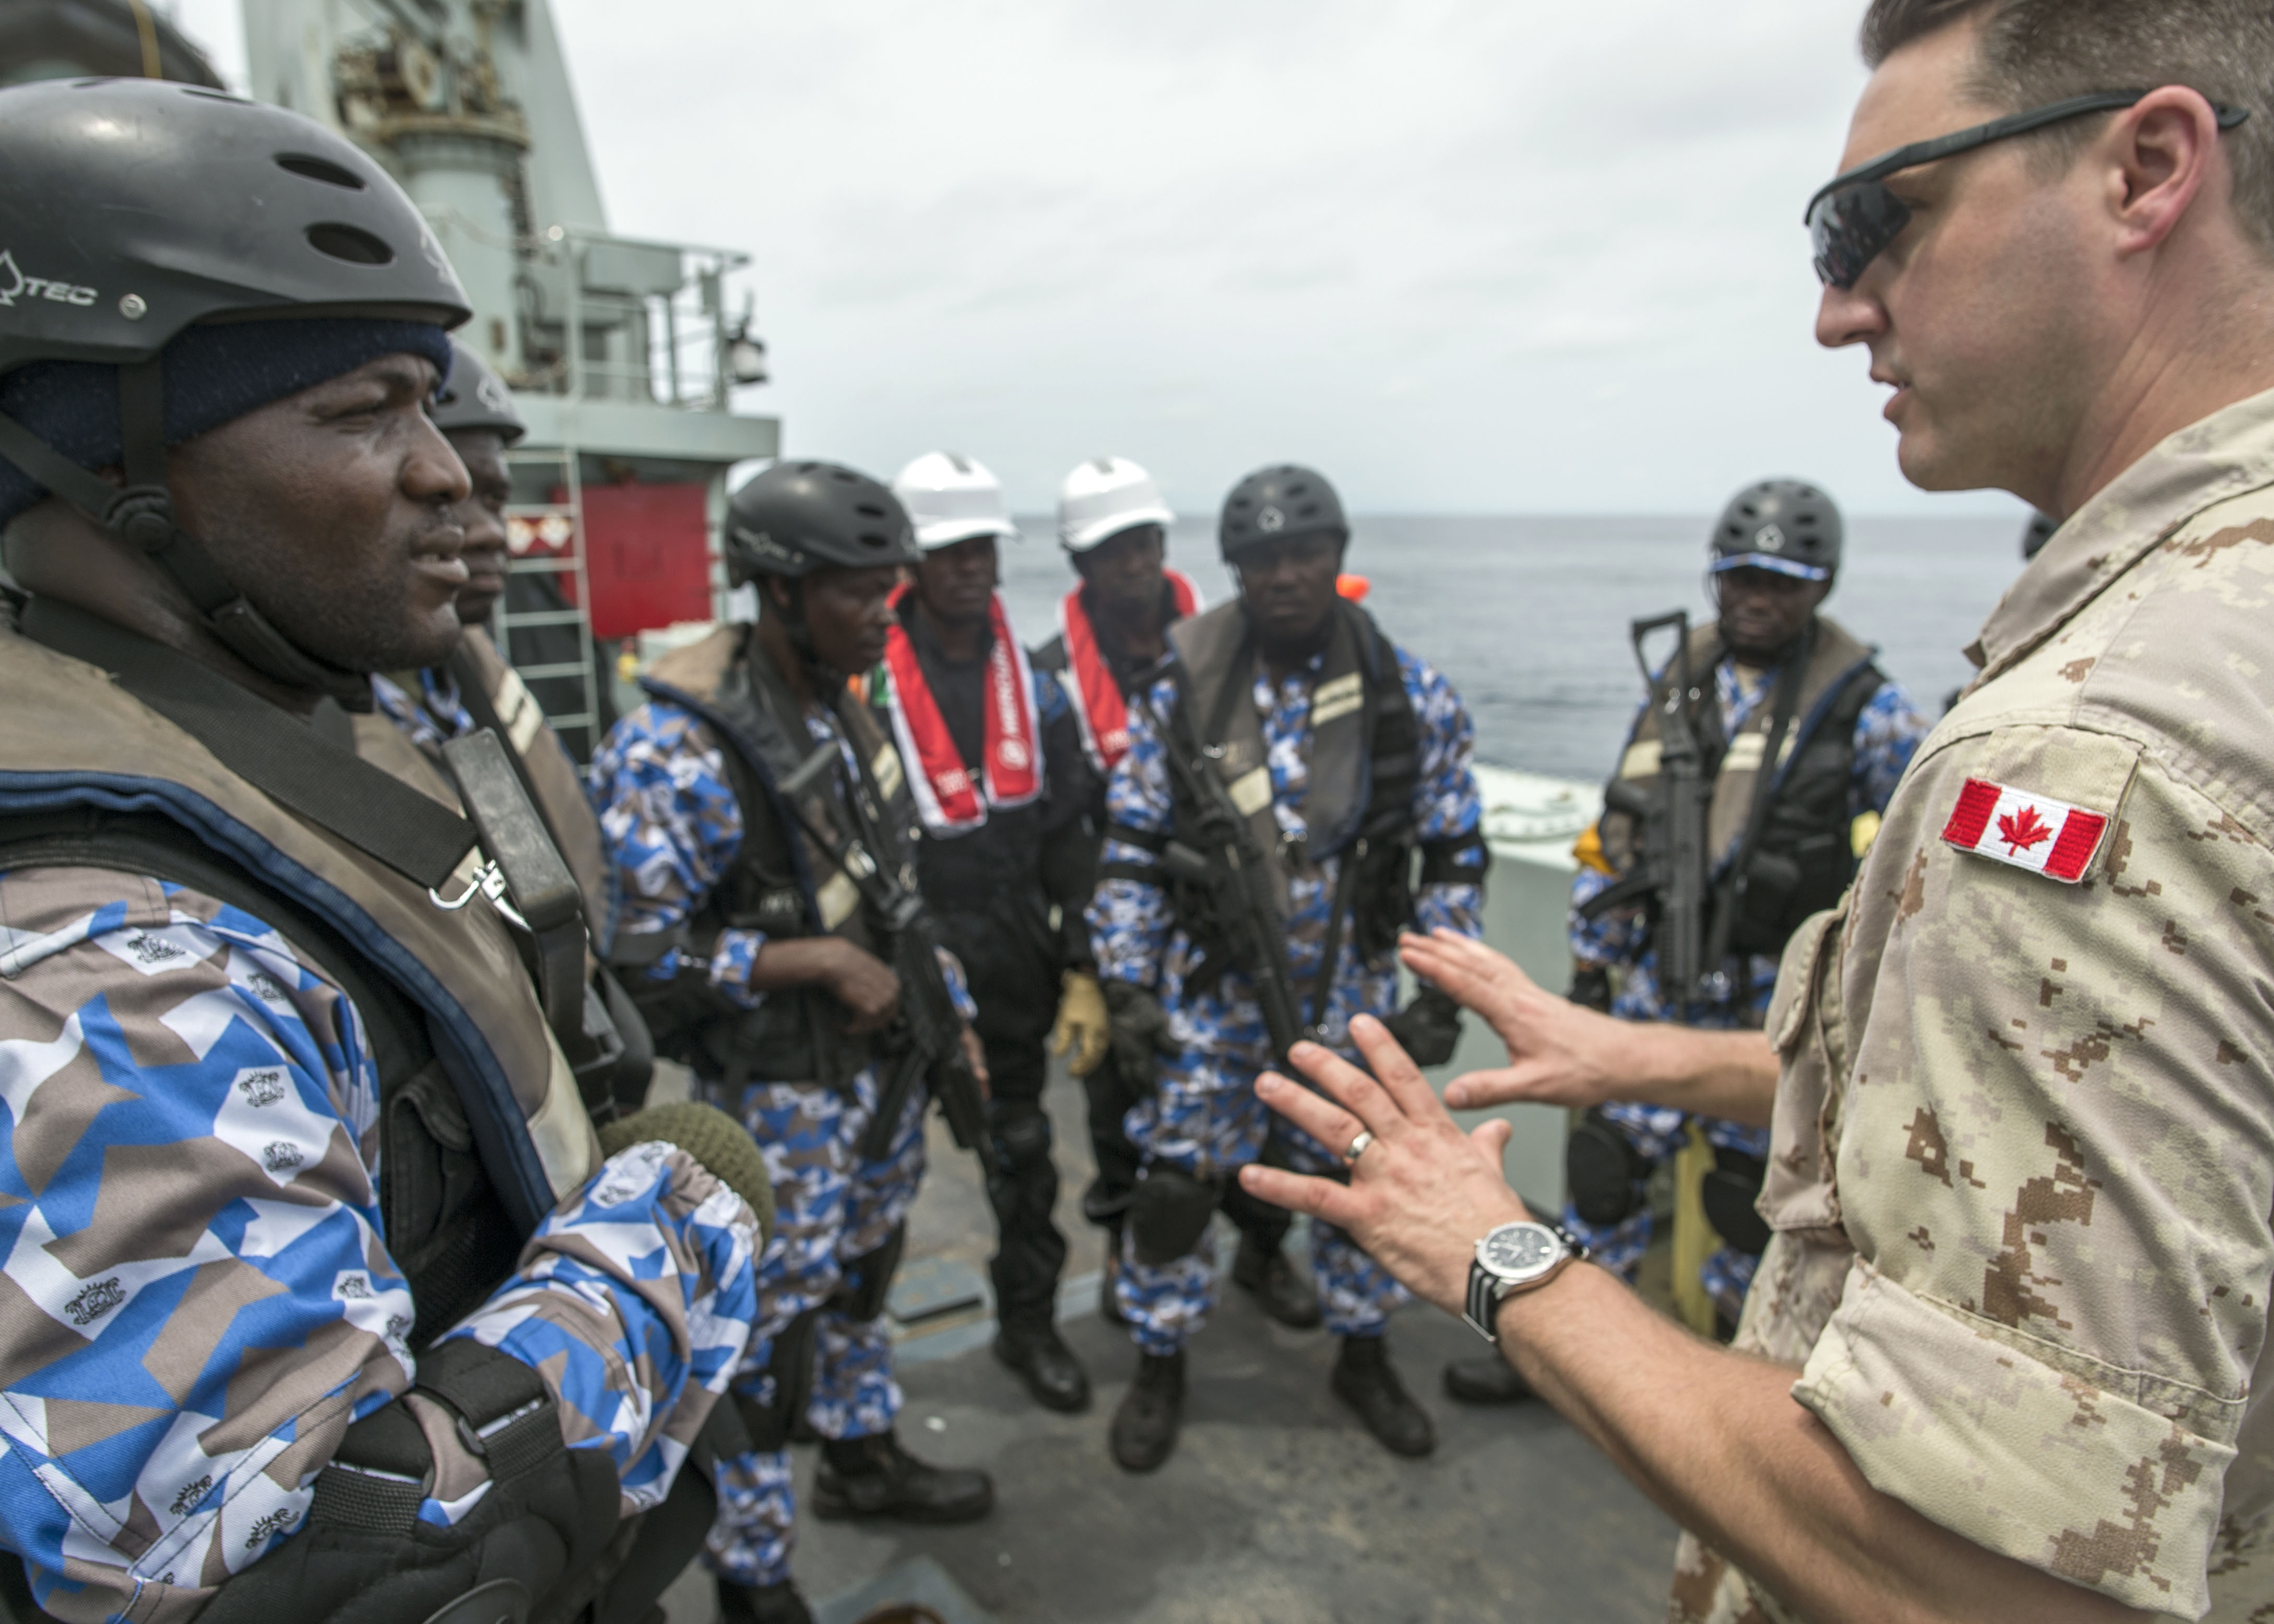 March 25, 2018. Lieutenant Commander Drew Foran, Liaison Officer to the Maritime Operations Centre in Cote D’Ivoire, speaks with the Cote D’Ivoire Boarding Team as part of naval Exercise OBANGAME EXPRESS onboard HMCS KINGSTON during Operation PROJECTION, off the coast of West Africa, March 25, 2018. Photo credit: Sgt Shilo Adamson, Canadian Forces Recruiting Group Headquarters, CFB Borden